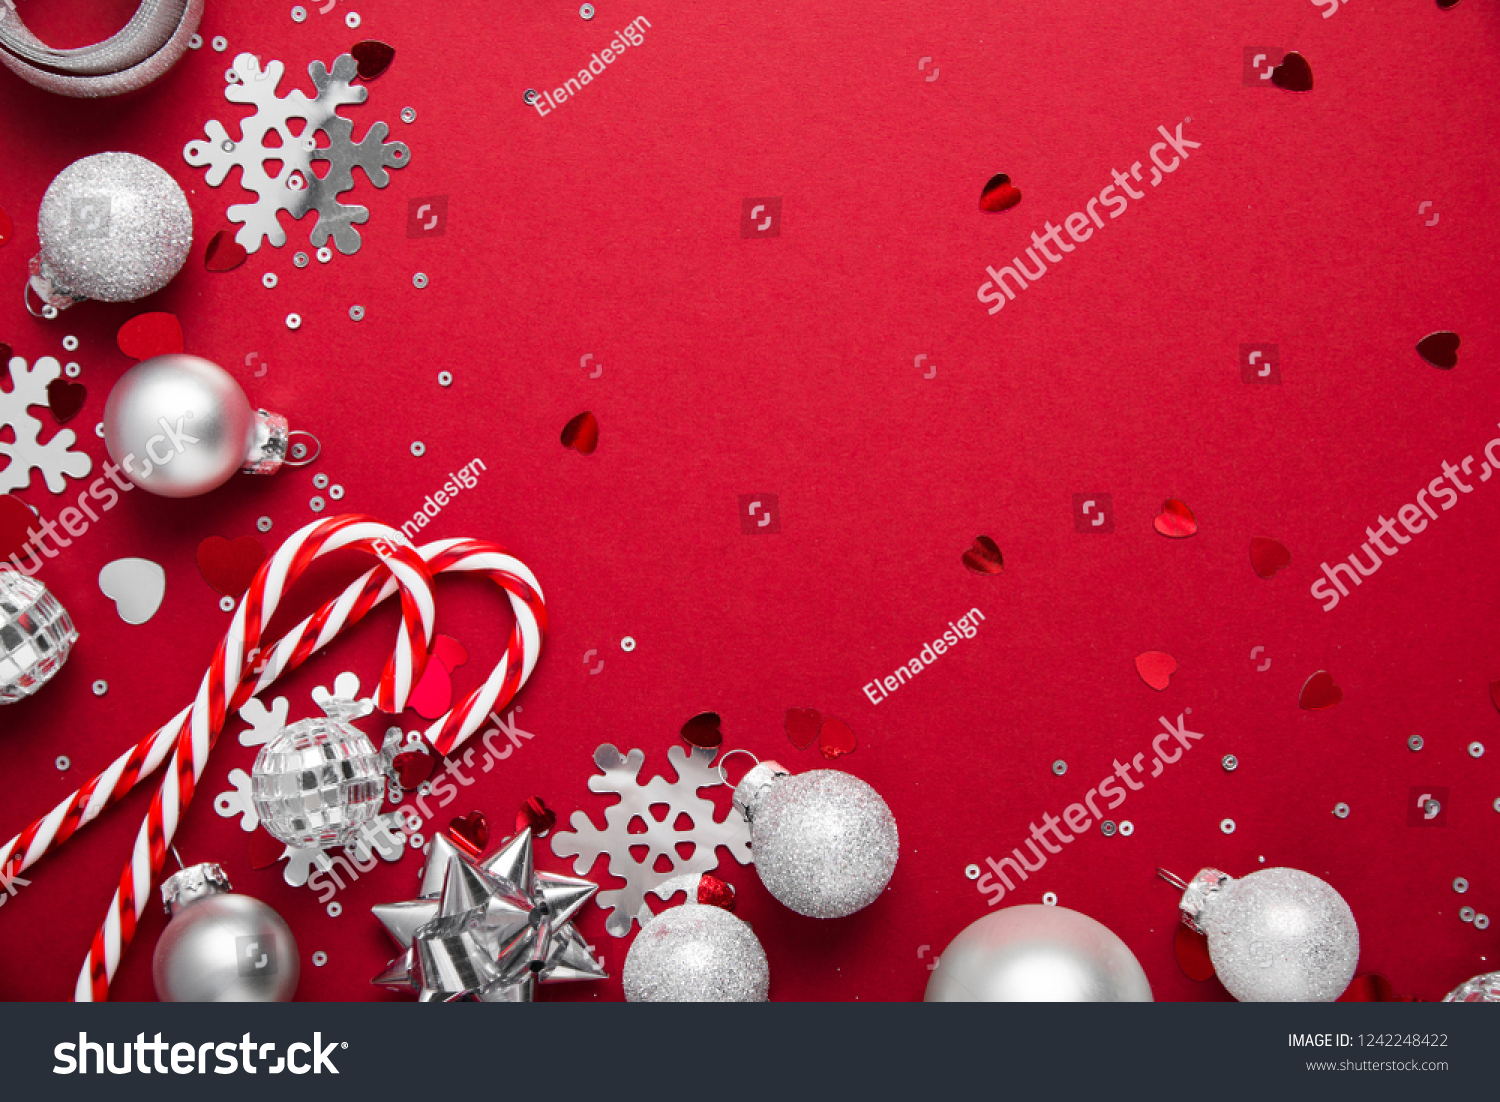 Merry Christmas and Happy Holidays greeting card, frame, banner. New Year. Noel. Christmas white and silver ornaments on red background top view. Winter holiday xmas theme. Flat lay. #1242248422